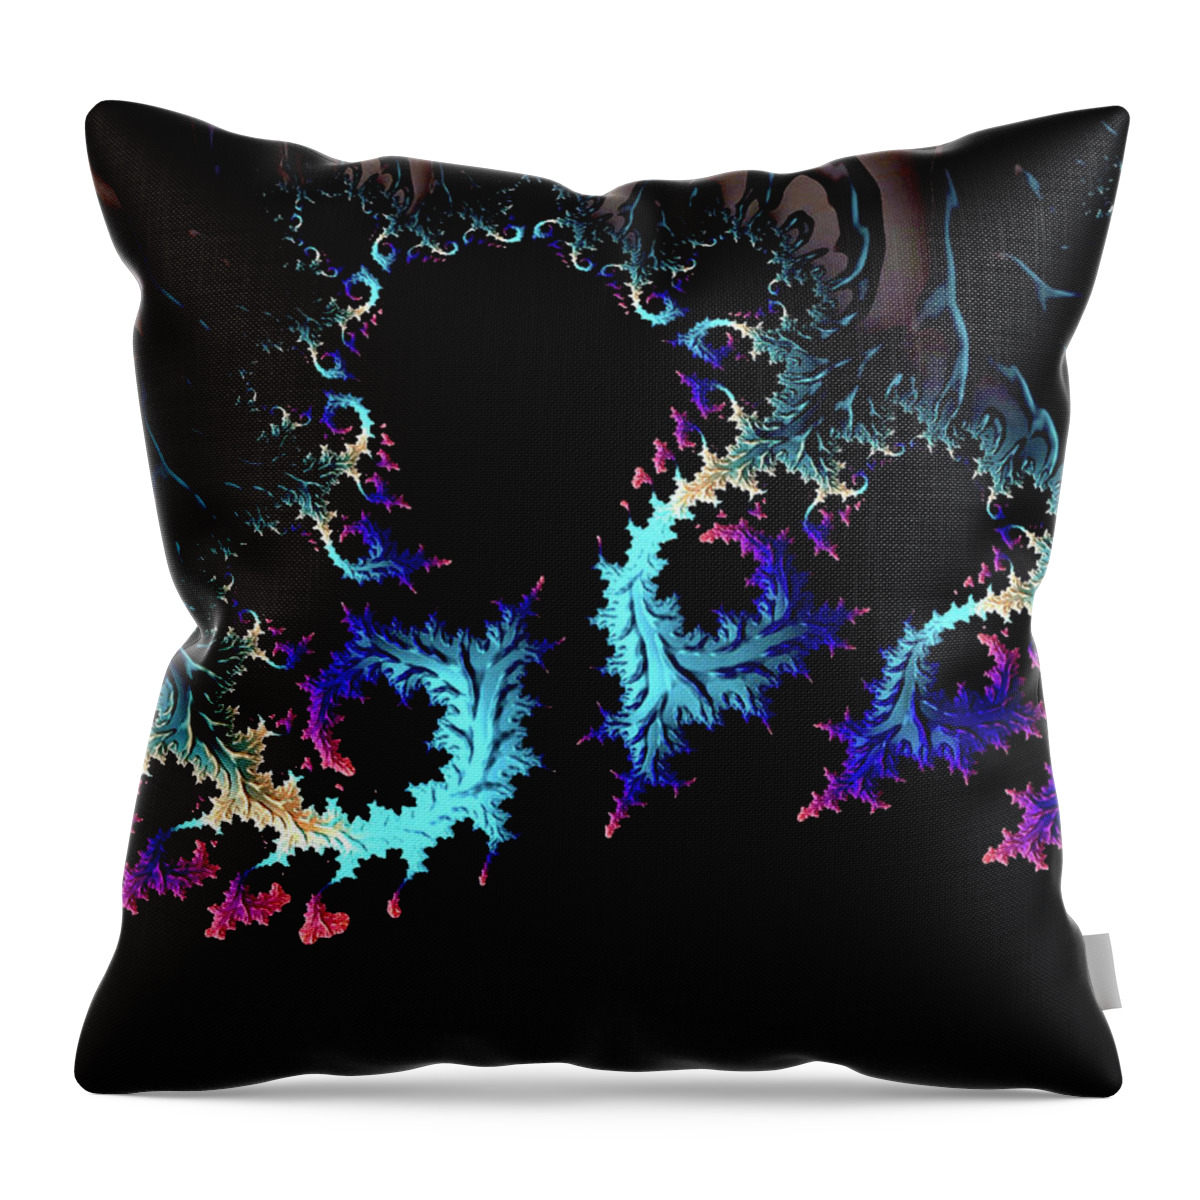 Encroaching Color Throw Pillow featuring the digital art Encroaching Color by Susan Maxwell Schmidt